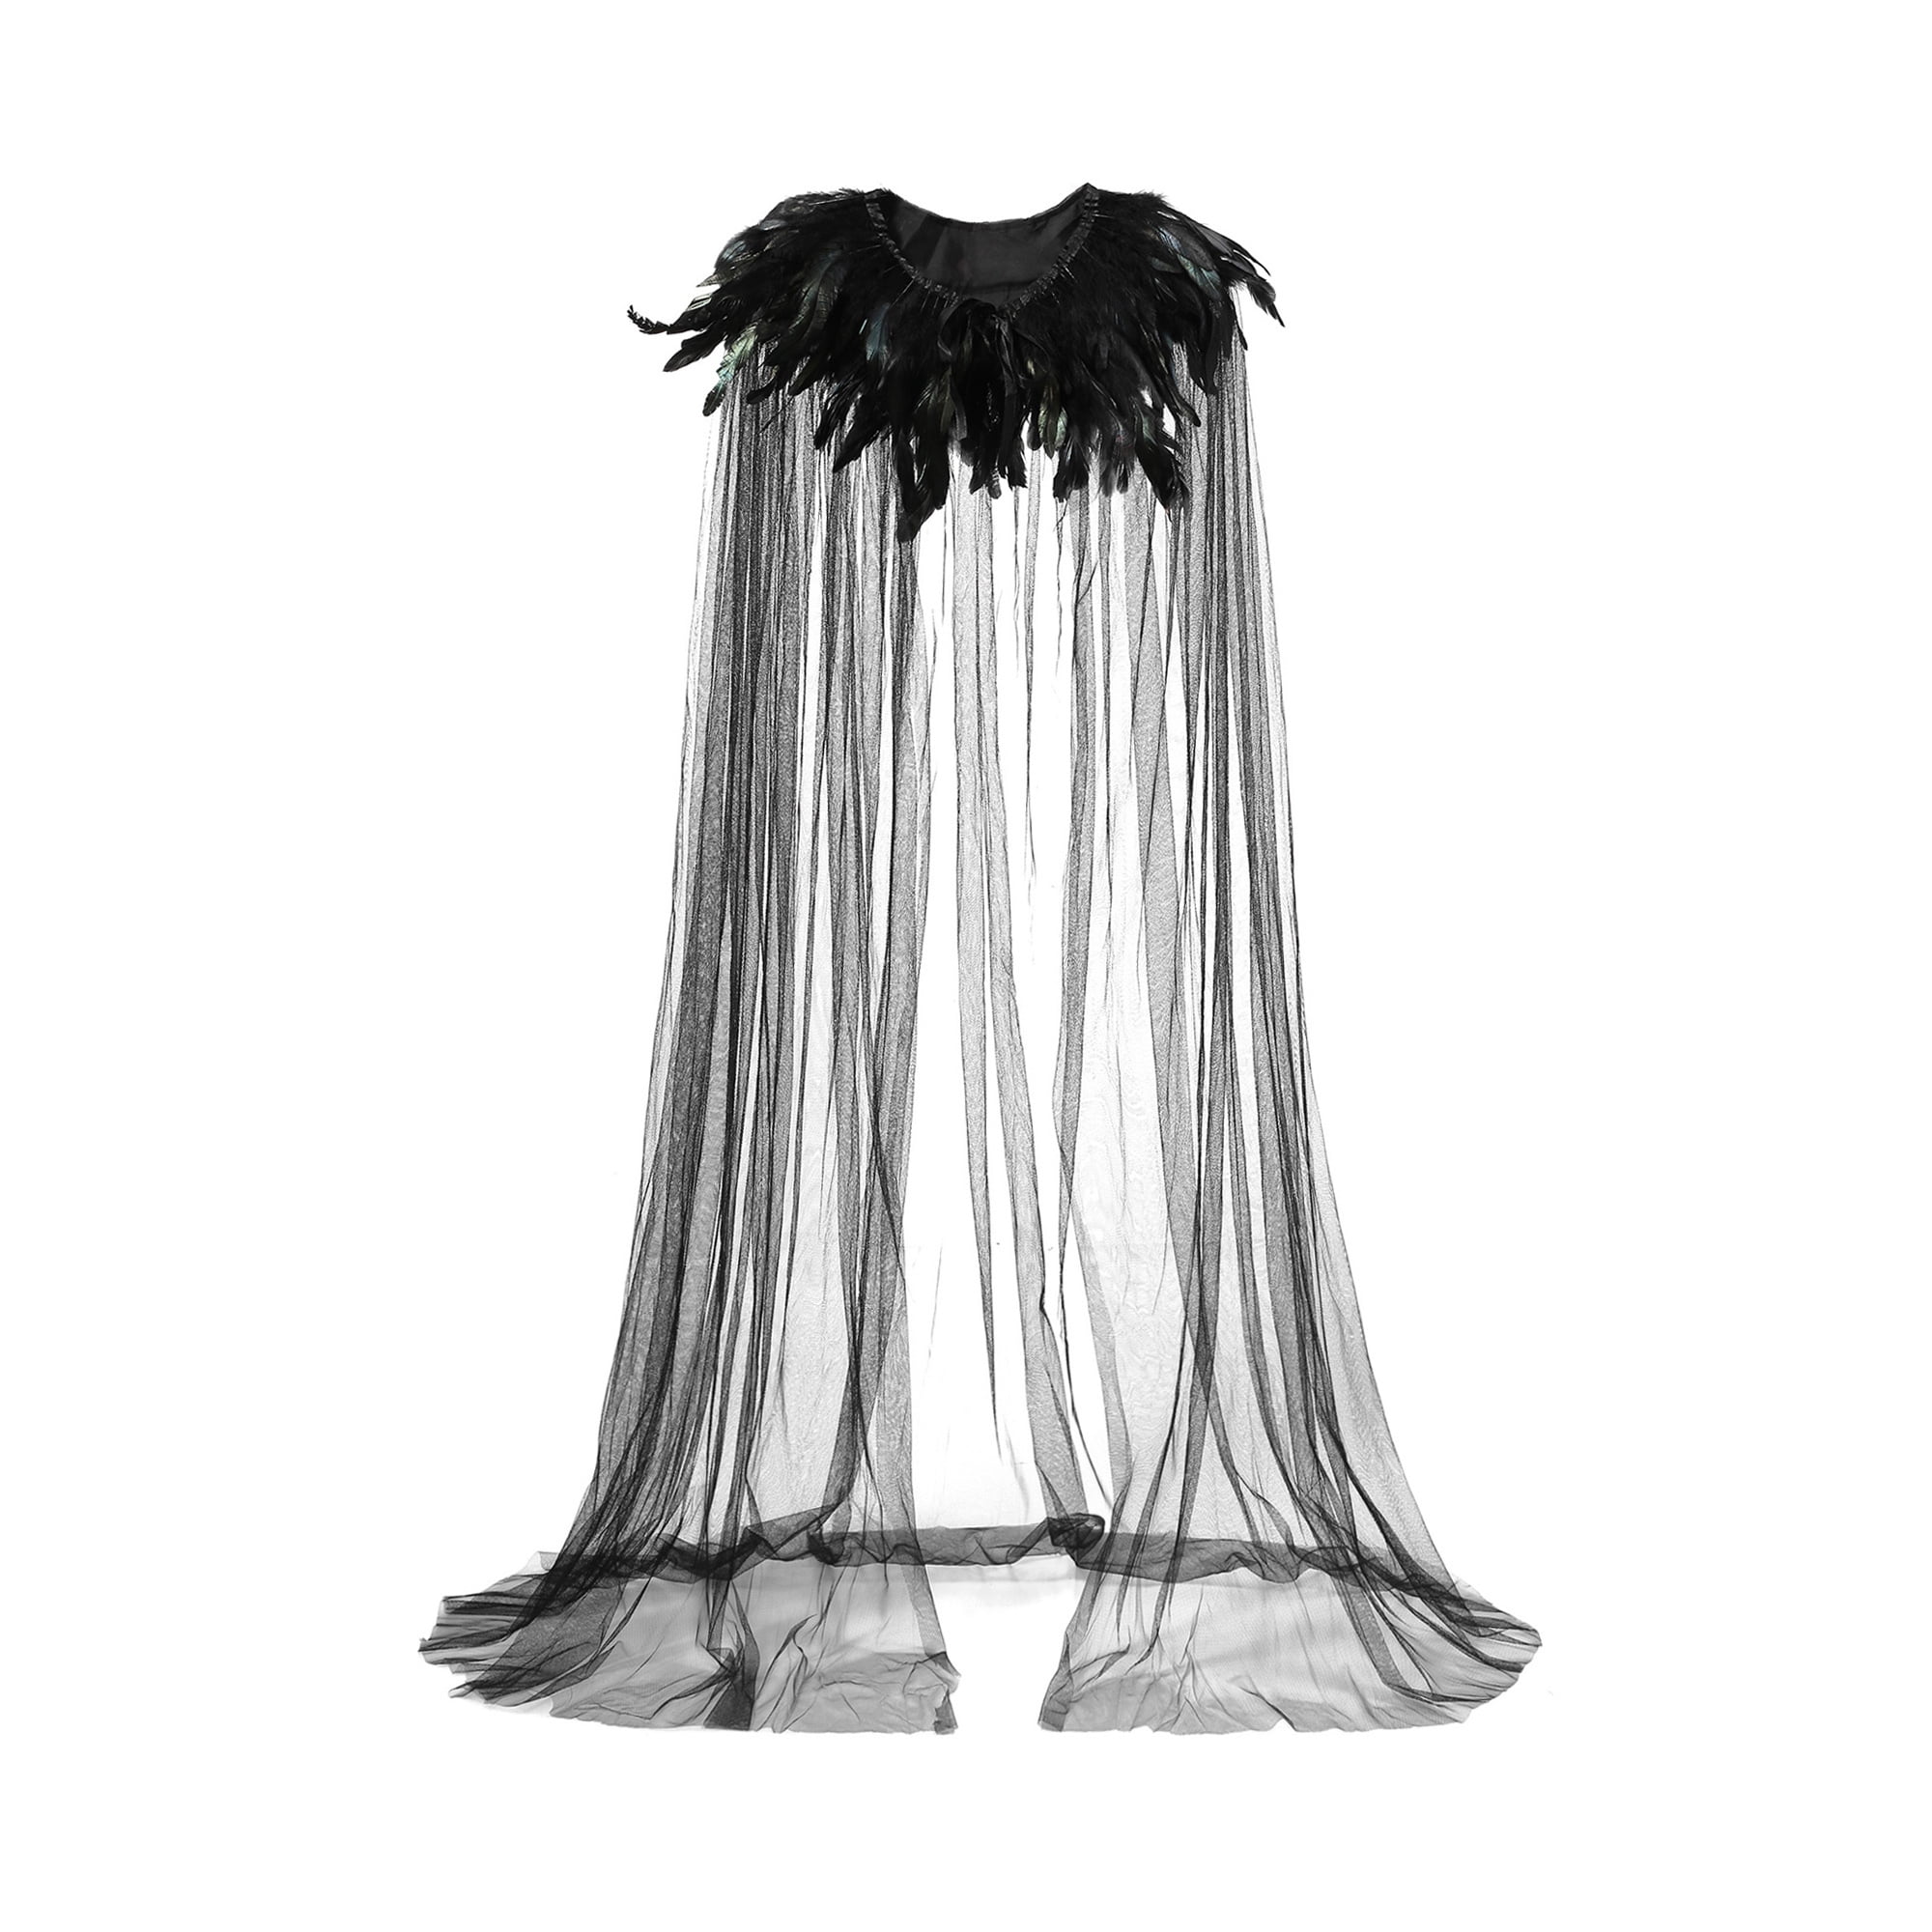 Sunisery Women Faux Feather Skirts Halloween Elastic Waist Mini Skirt  Costumes Christmas Party Stage Cosplay Accessory 